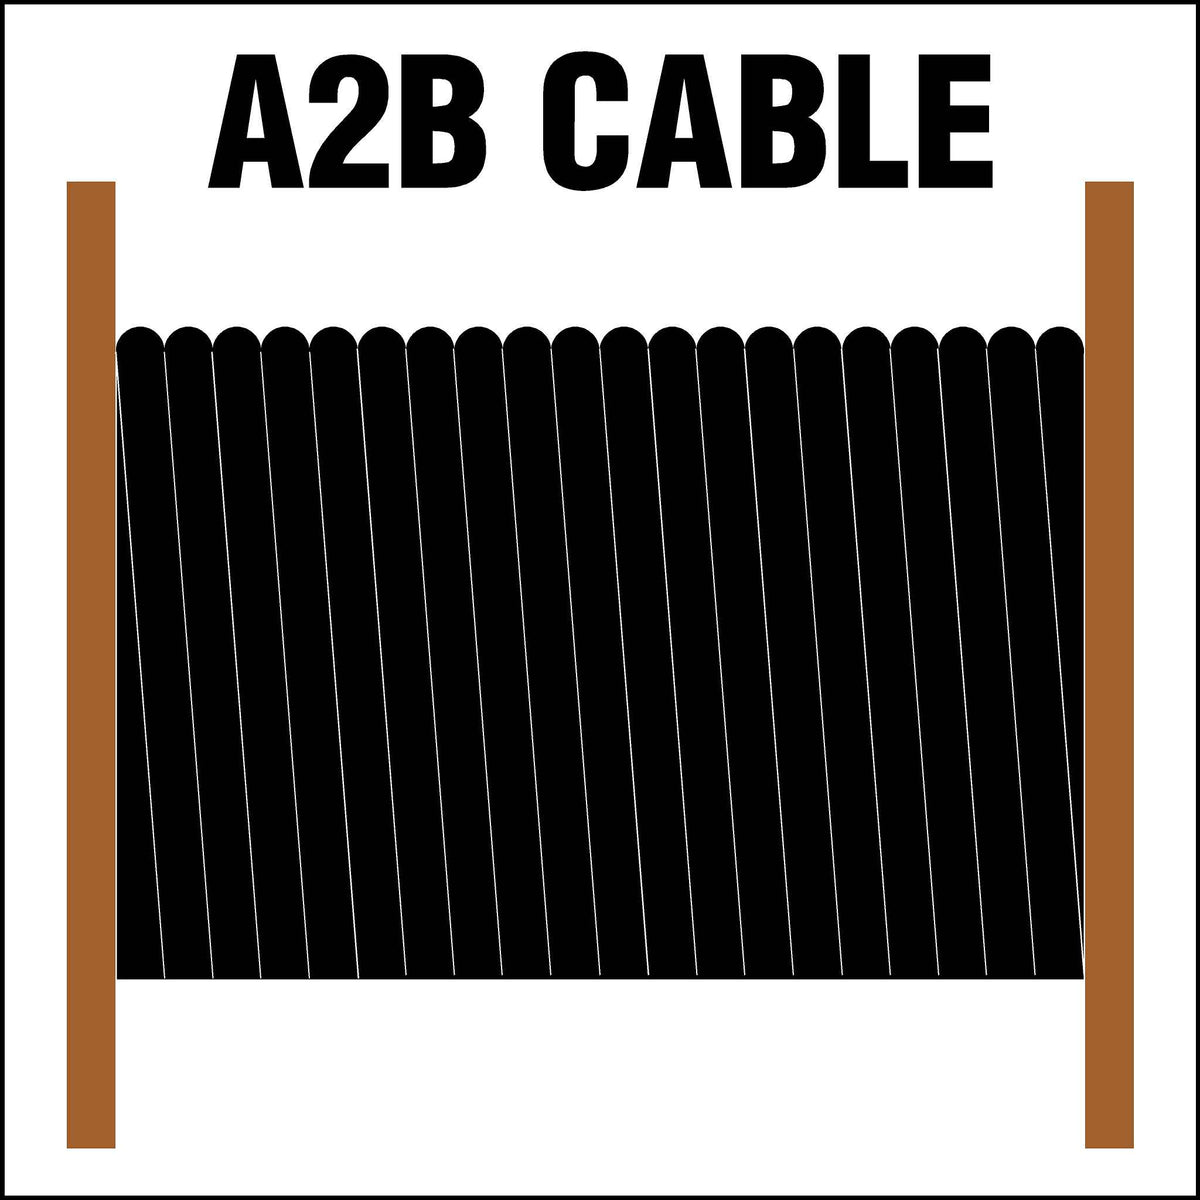 This Illustration Shows a Roll of Black a2B Cable on a Brown Wooden Spool.